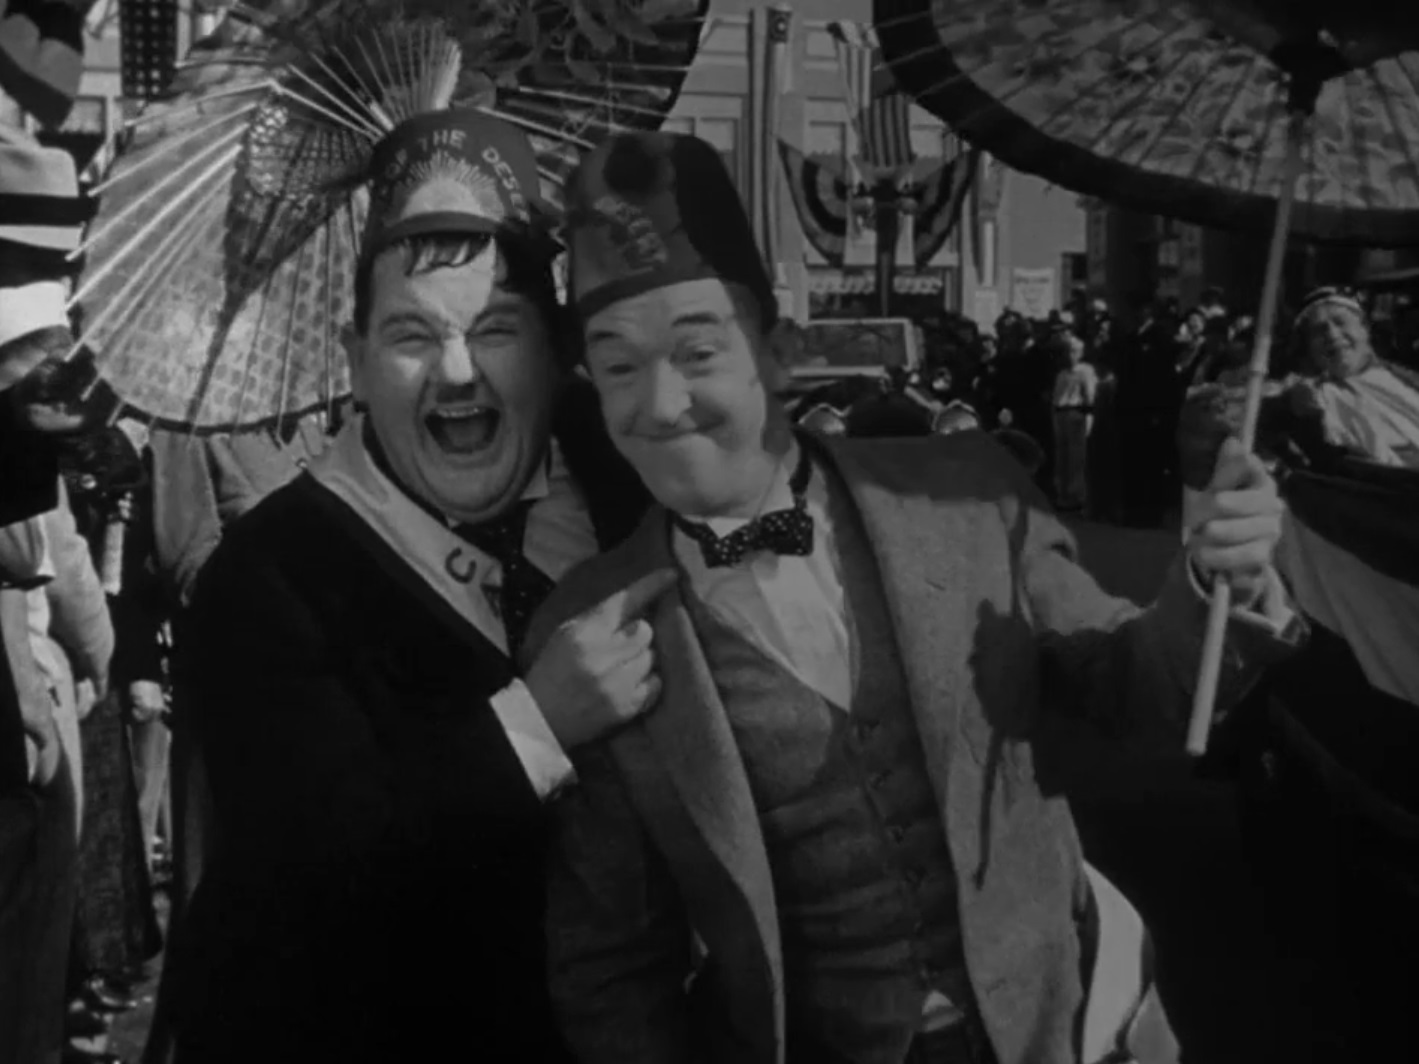 SONS OF THE DESERT movie poster LAUREL & HARDY & CHASE fun CHARACTERS 24X36-PW0 